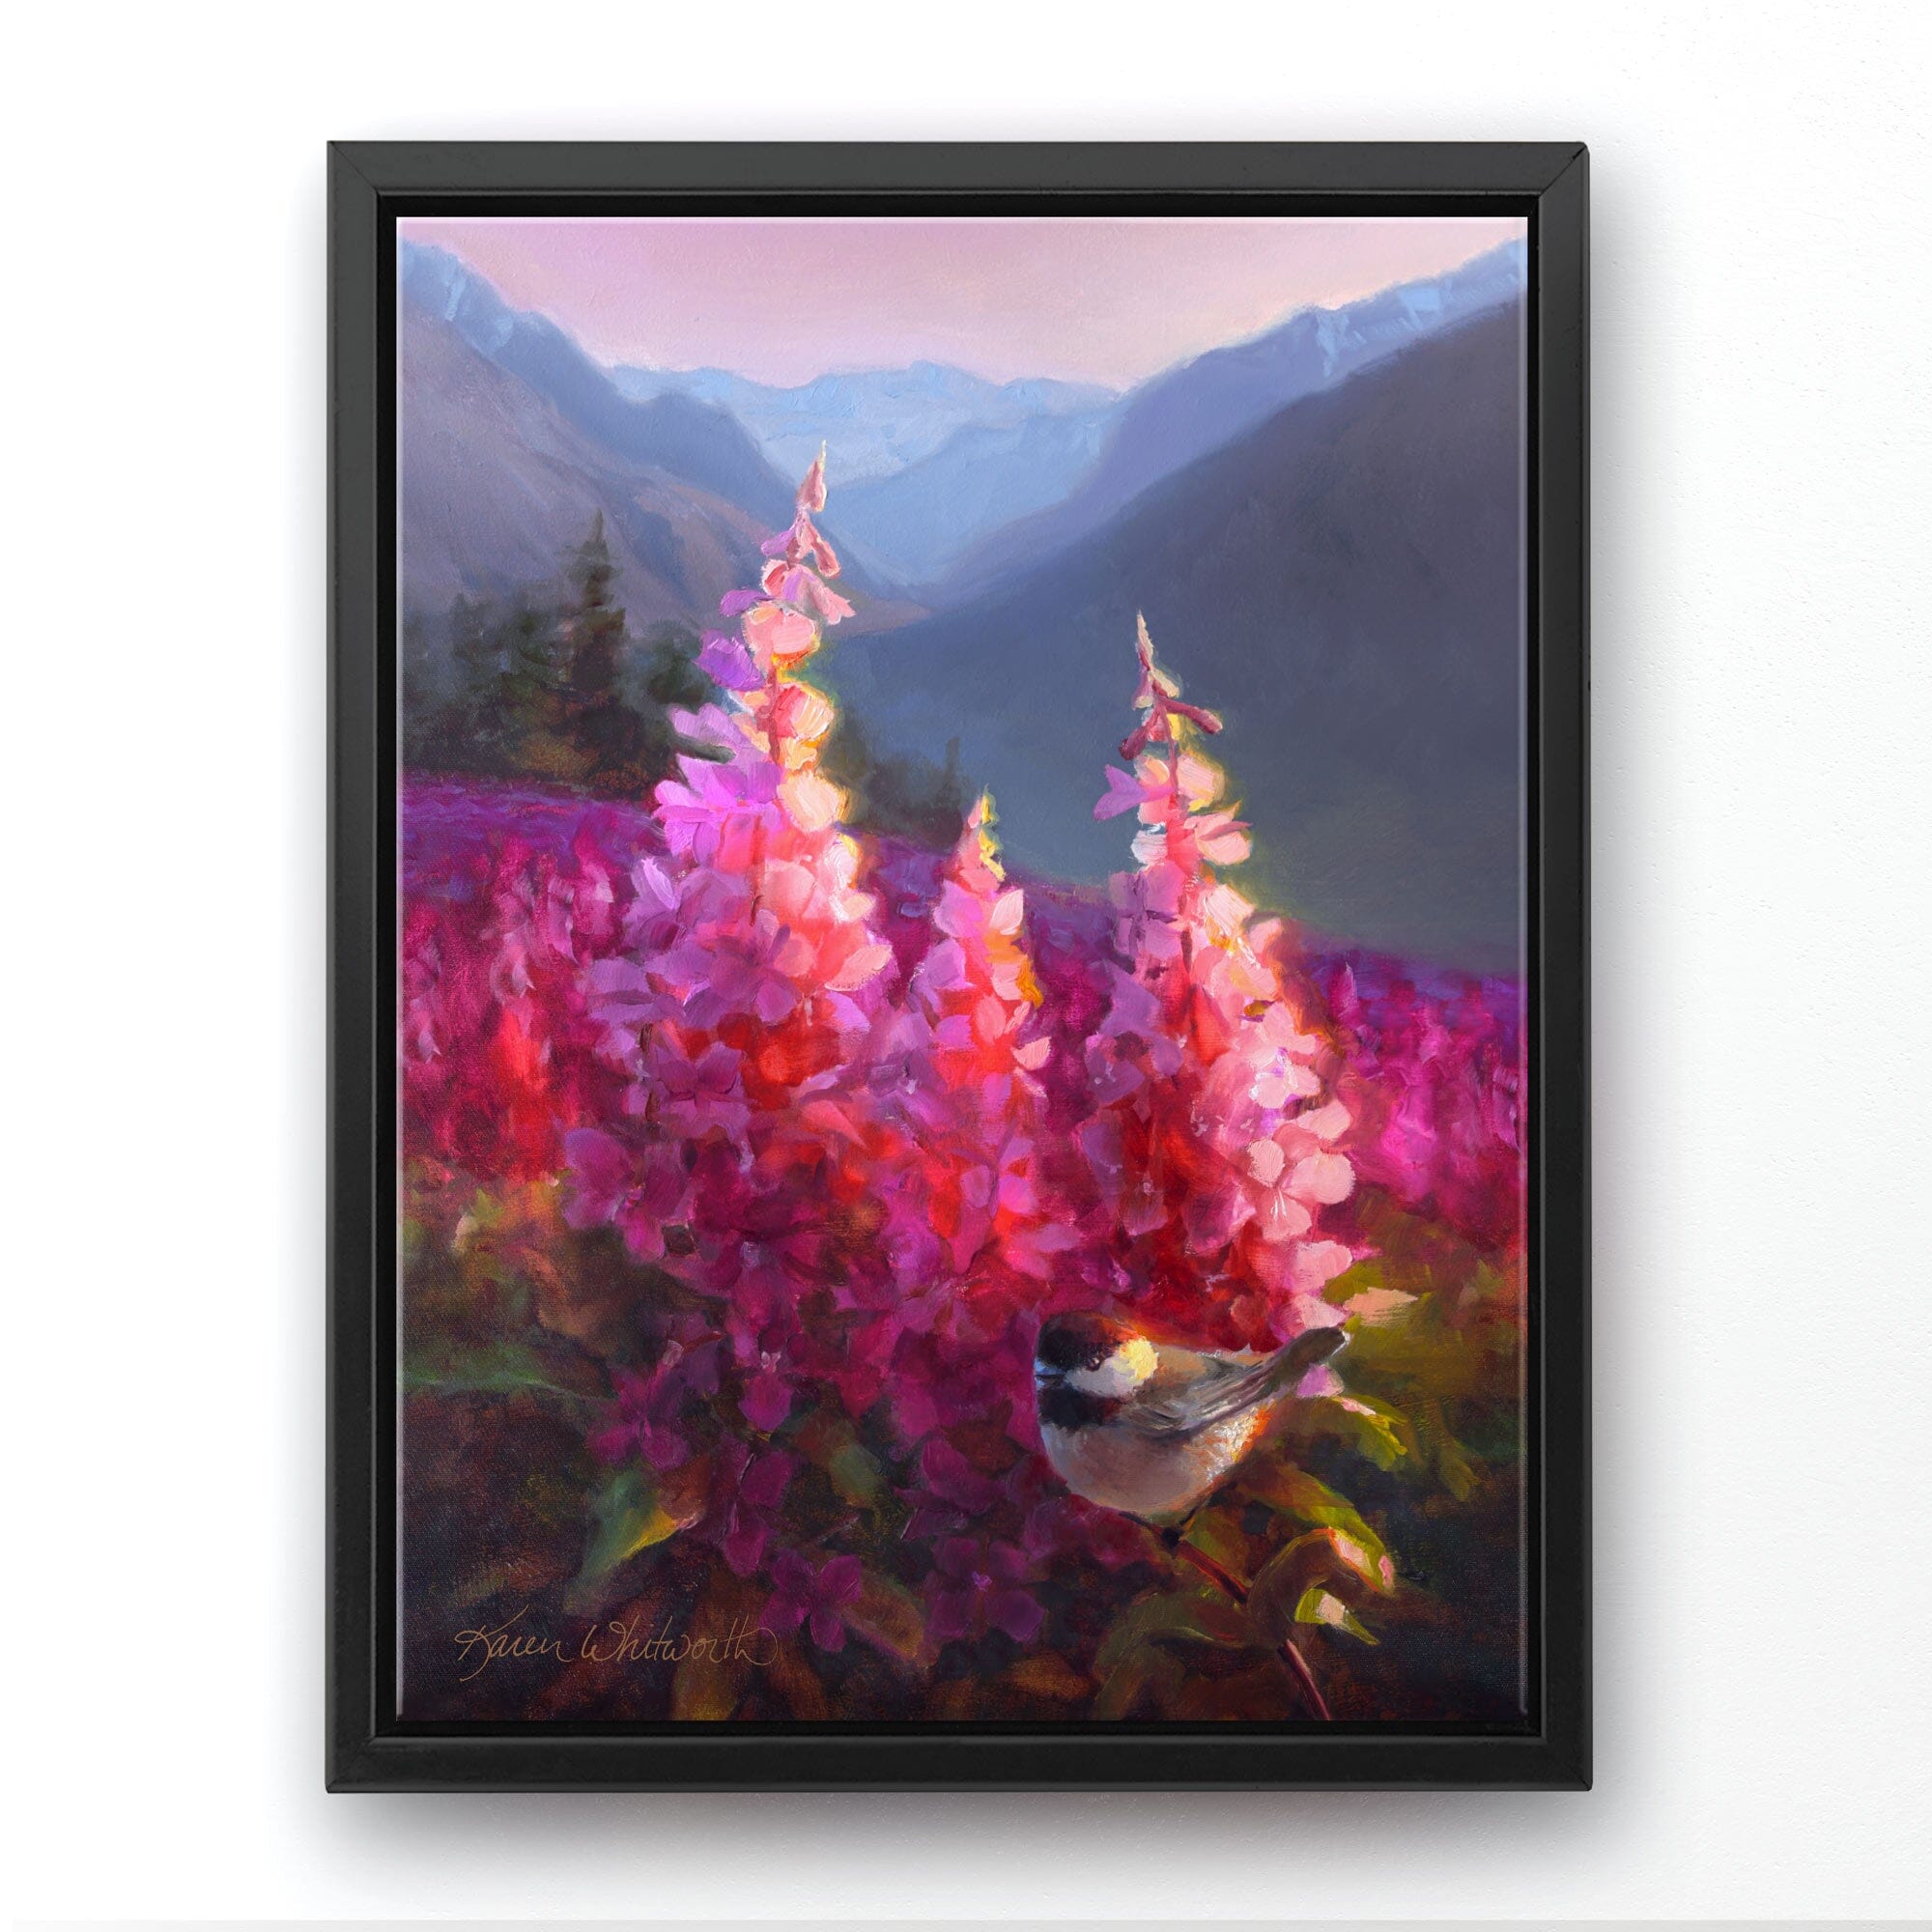 Alaska art on canvas of mountains with alpenglow on a meadow of fireweed flowers. This landscape painting is framed with a black floater frame and is hanging on a white wall.